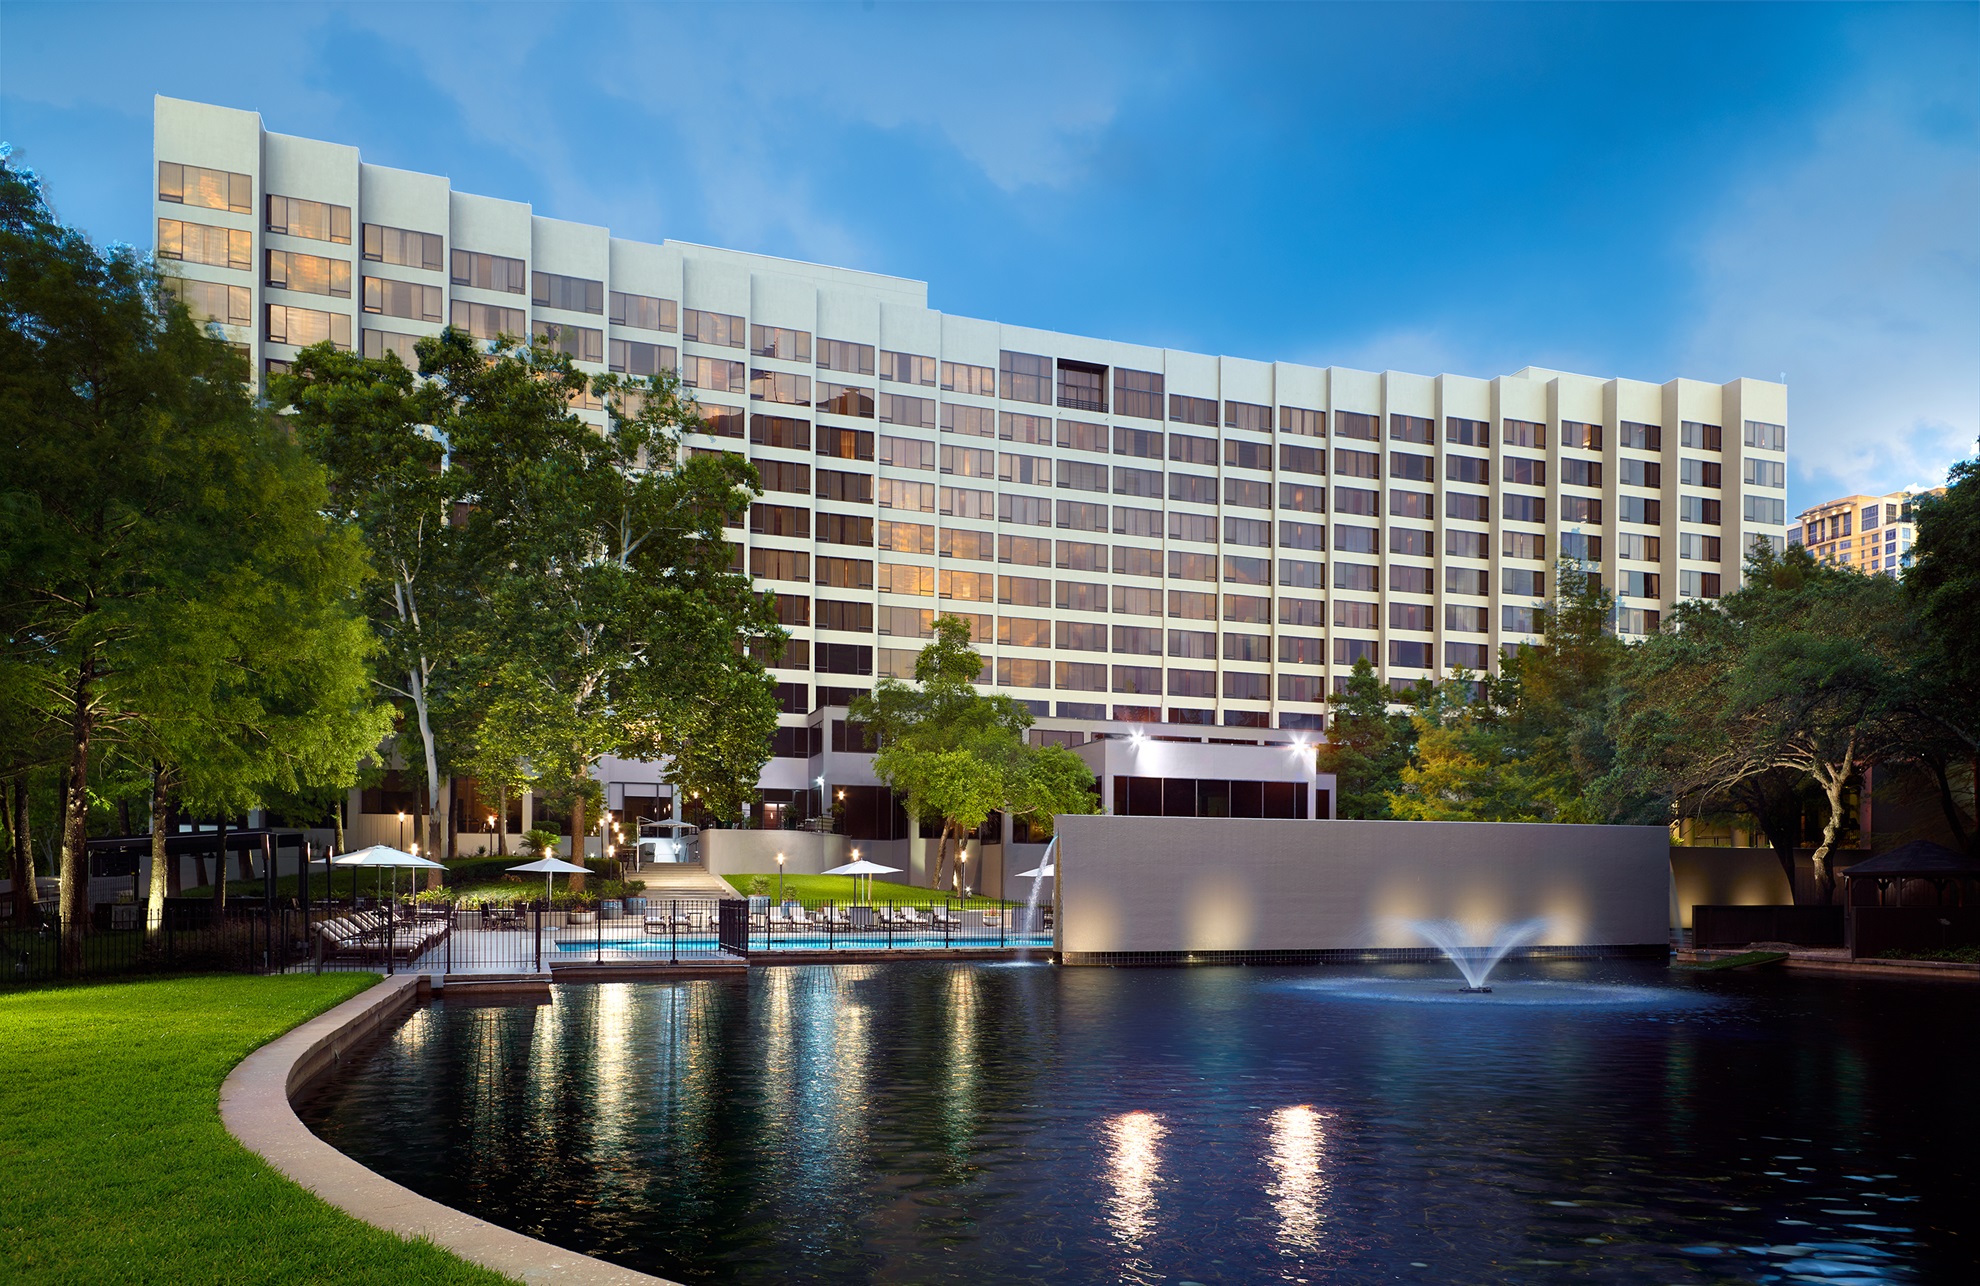 The 10 best hotels near The Galleria Houston in Houston, United